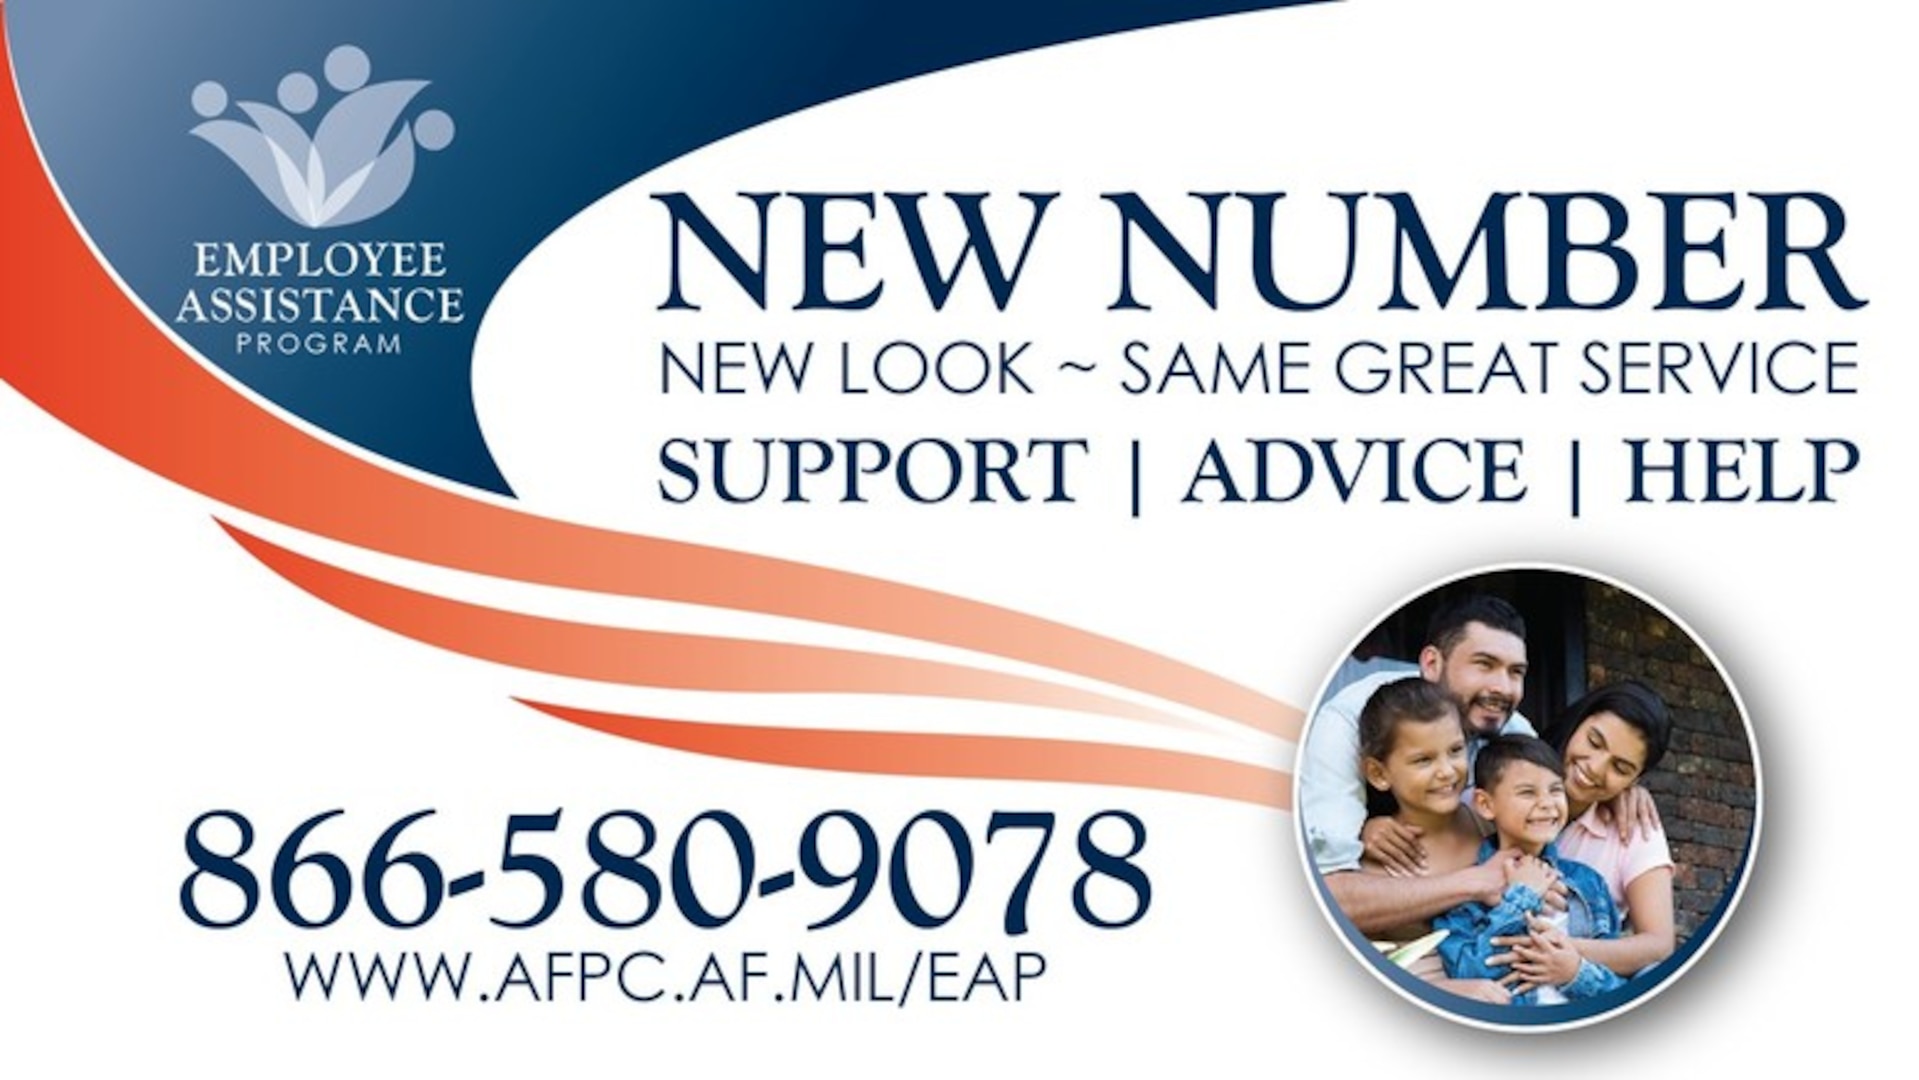 The Air Force Employee Assistance Program has relaunched with a new phone number, 1-866-580-9078, and new website, www.AFPC.af.mil/EAP. The program will provide the same services and same access to care provided in the past with continued access 24/7 via telephone, website or in-person. (Courtesy graphic)